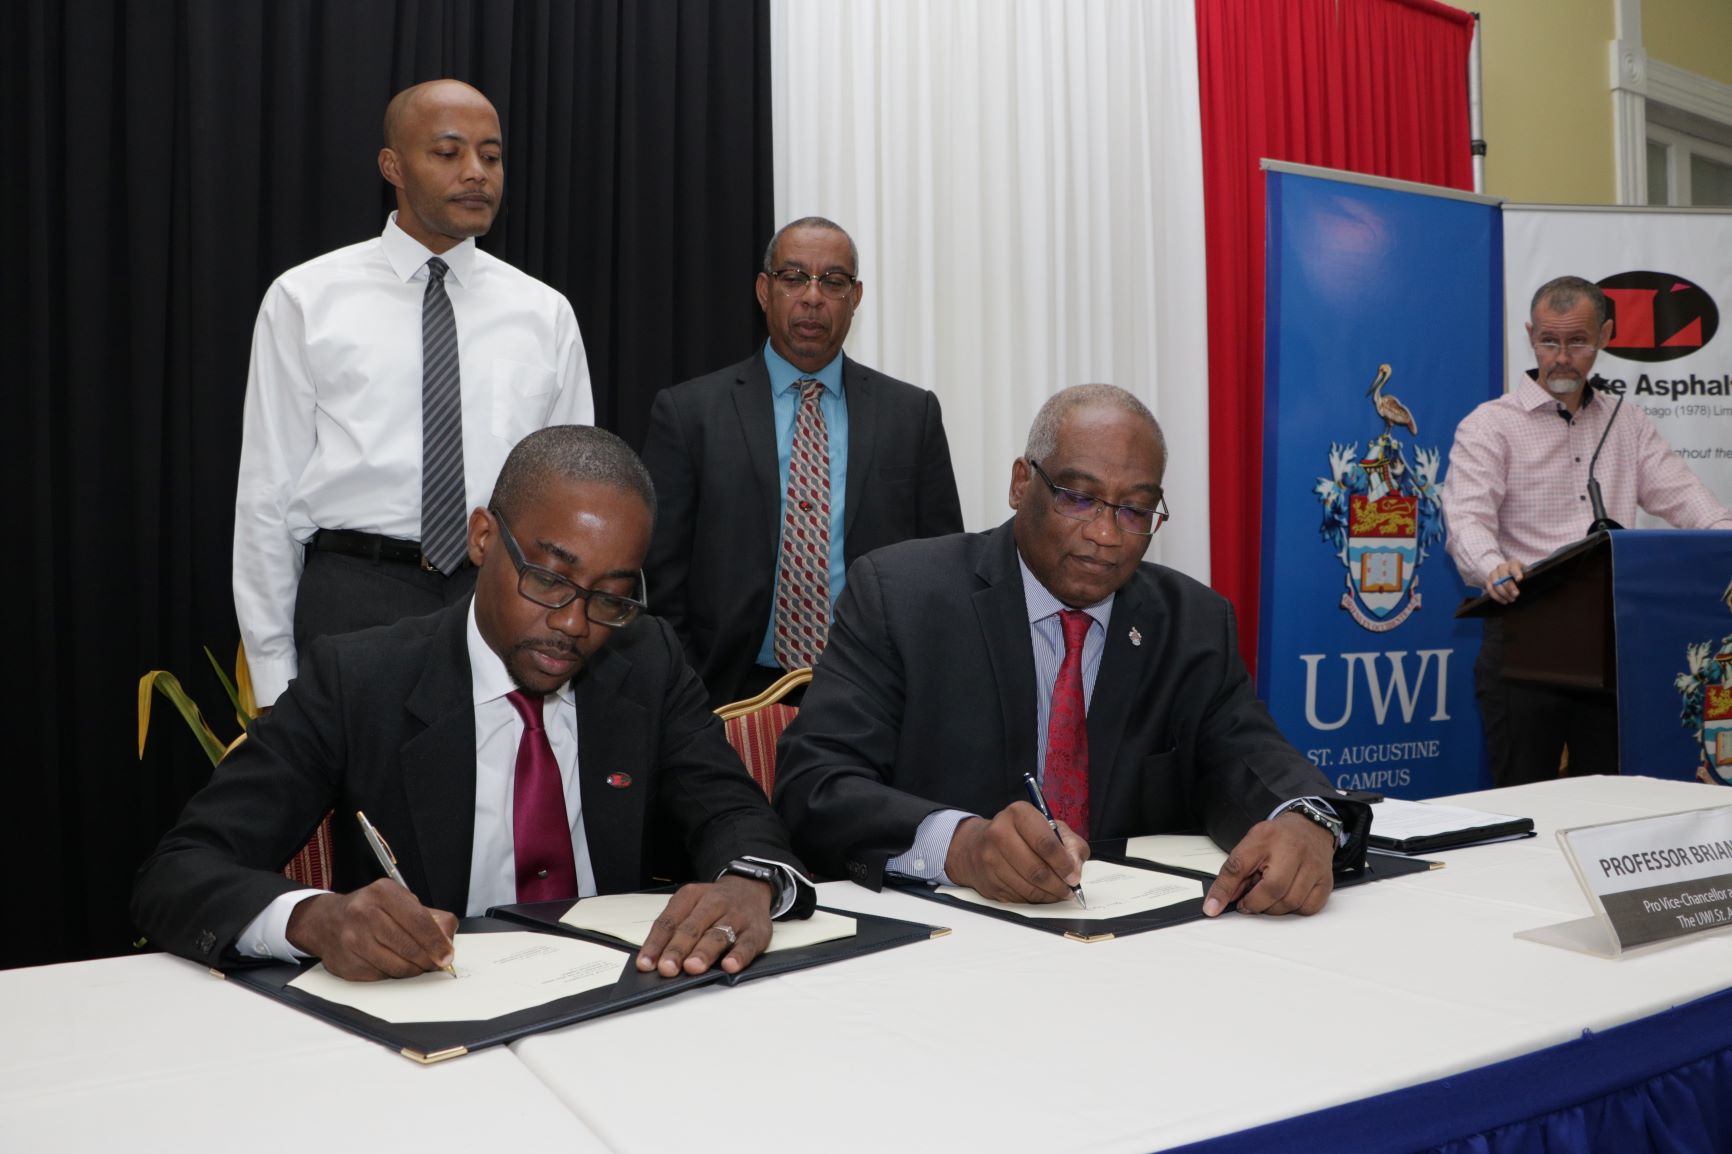  Chief Executive Officer of Lake Asphalt of Trinidad and Tobago Ltd., Mr Roger Wiggins and Pro Vice-Chancellor and Campus Principal of The UWI St Augustine, Professor Brian Copeland sign the licence agreement. Looking on are Dr. Richard Fairman, Head, Department of Chemistry, Mr. Stephen Mc Clashie, Director, Lake Asphalt and Mr. Julian Henry Programme Manager, The Entrepreneurship Unit.